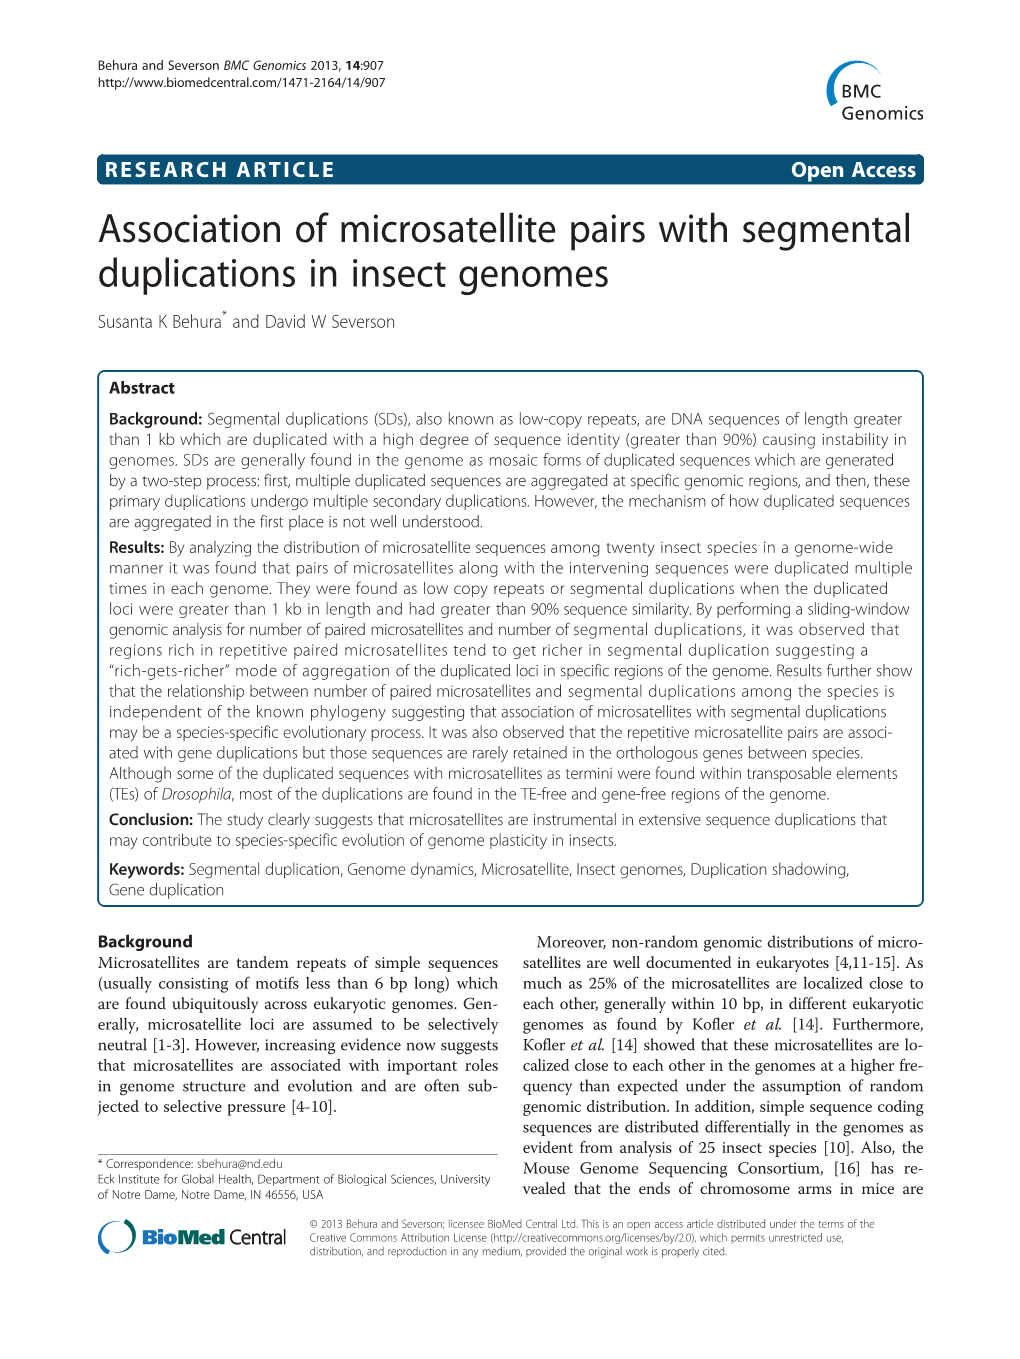 Association of Microsatellite Pairs with Segmental Duplications in Insect Genomes Susanta K Behura* and David W Severson